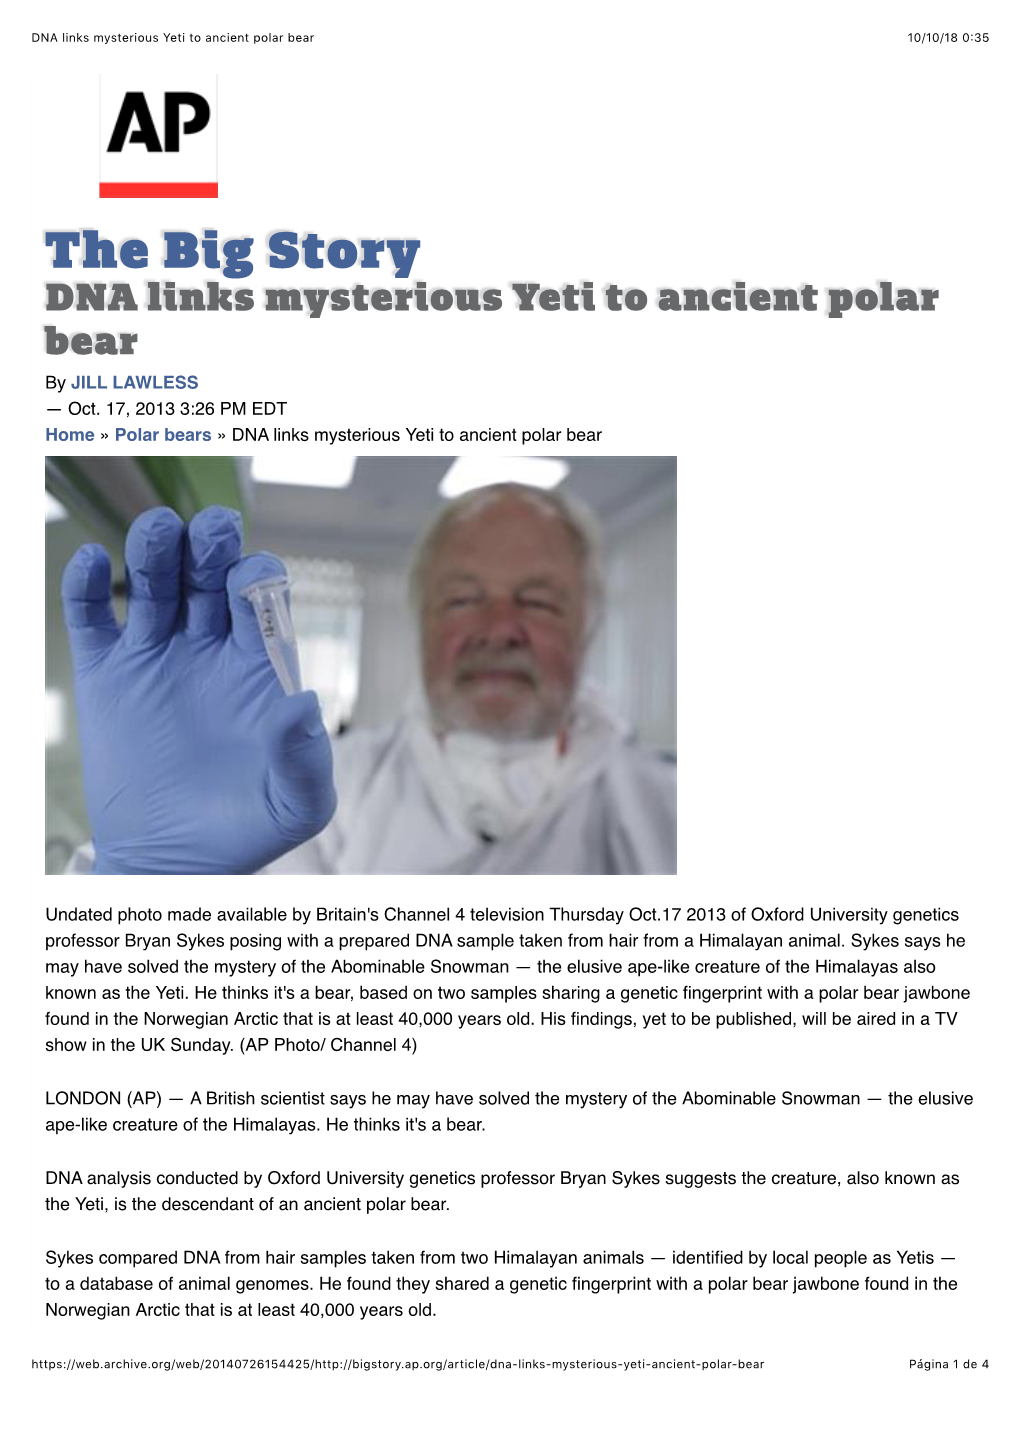 The Big Story DNA Links Mysterious Yeti to Ancient Polar Bear by JILL LAWLESS — Oct